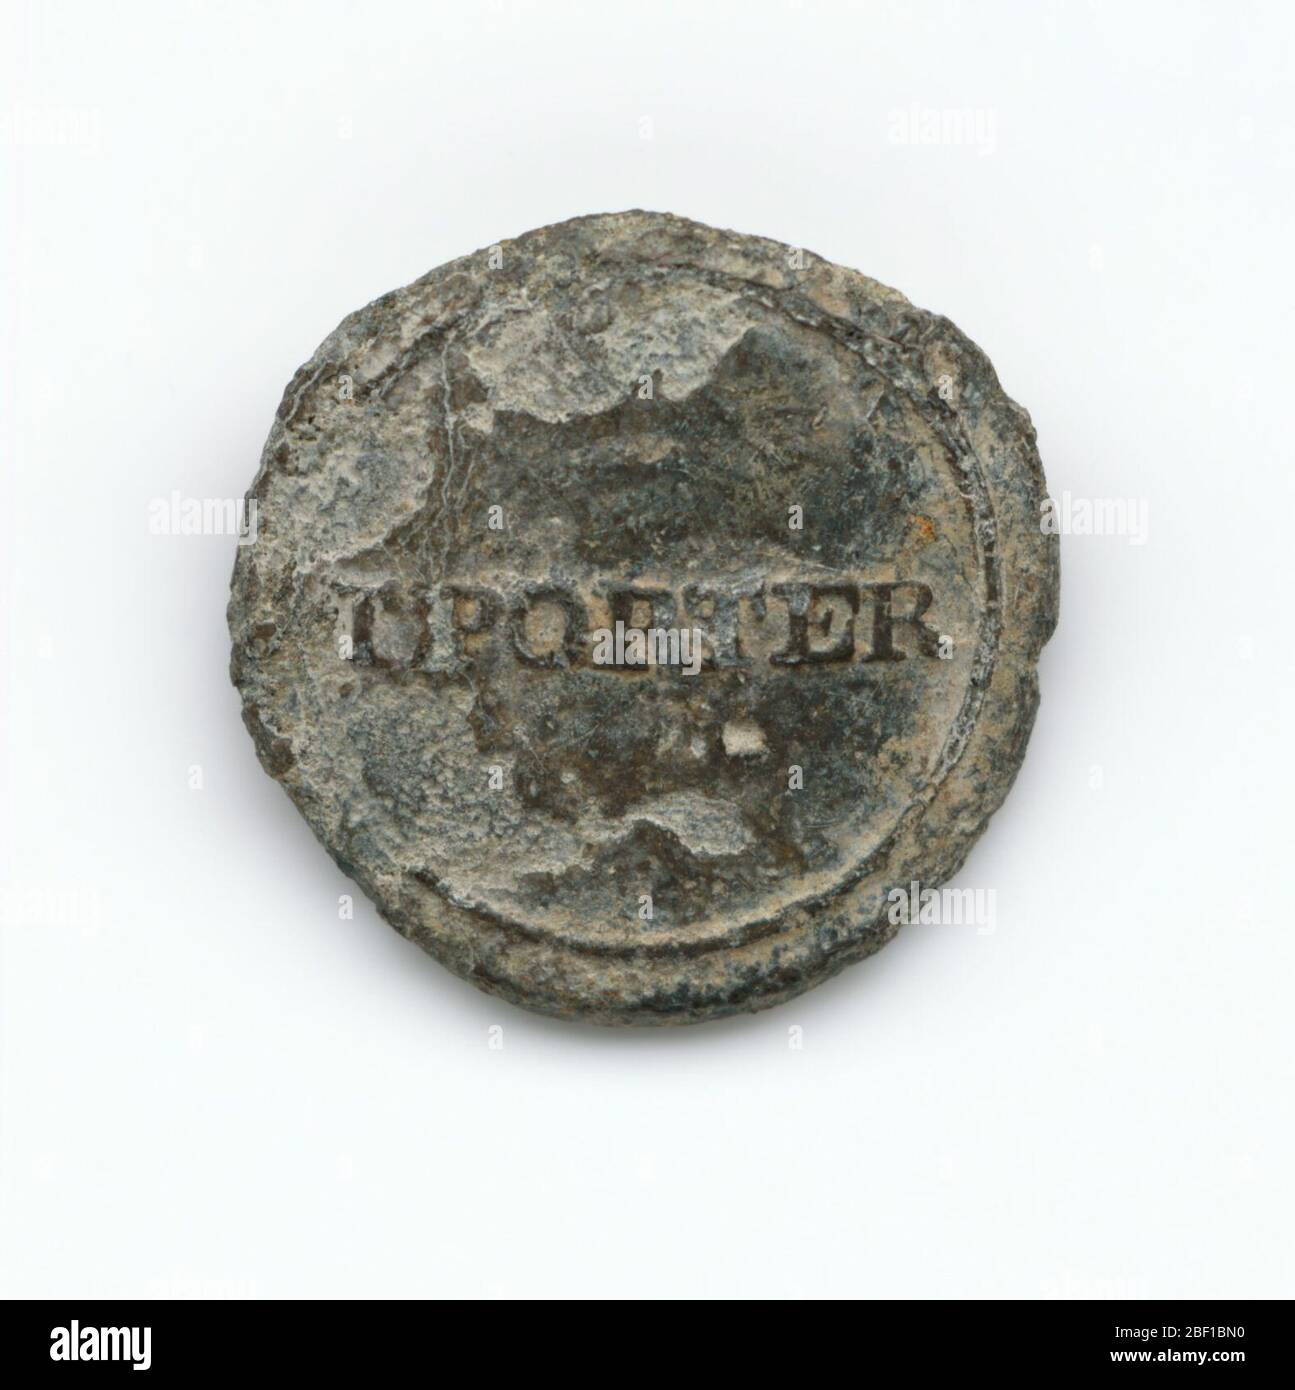 Identification button used by Thomas Porter II. A round pewter button with 'TPORTER' stamped across the middle. This button would have been sewn onto an enslaved person's shirt to identify him or her as belonging to Thomas Porter II. Stock Photo